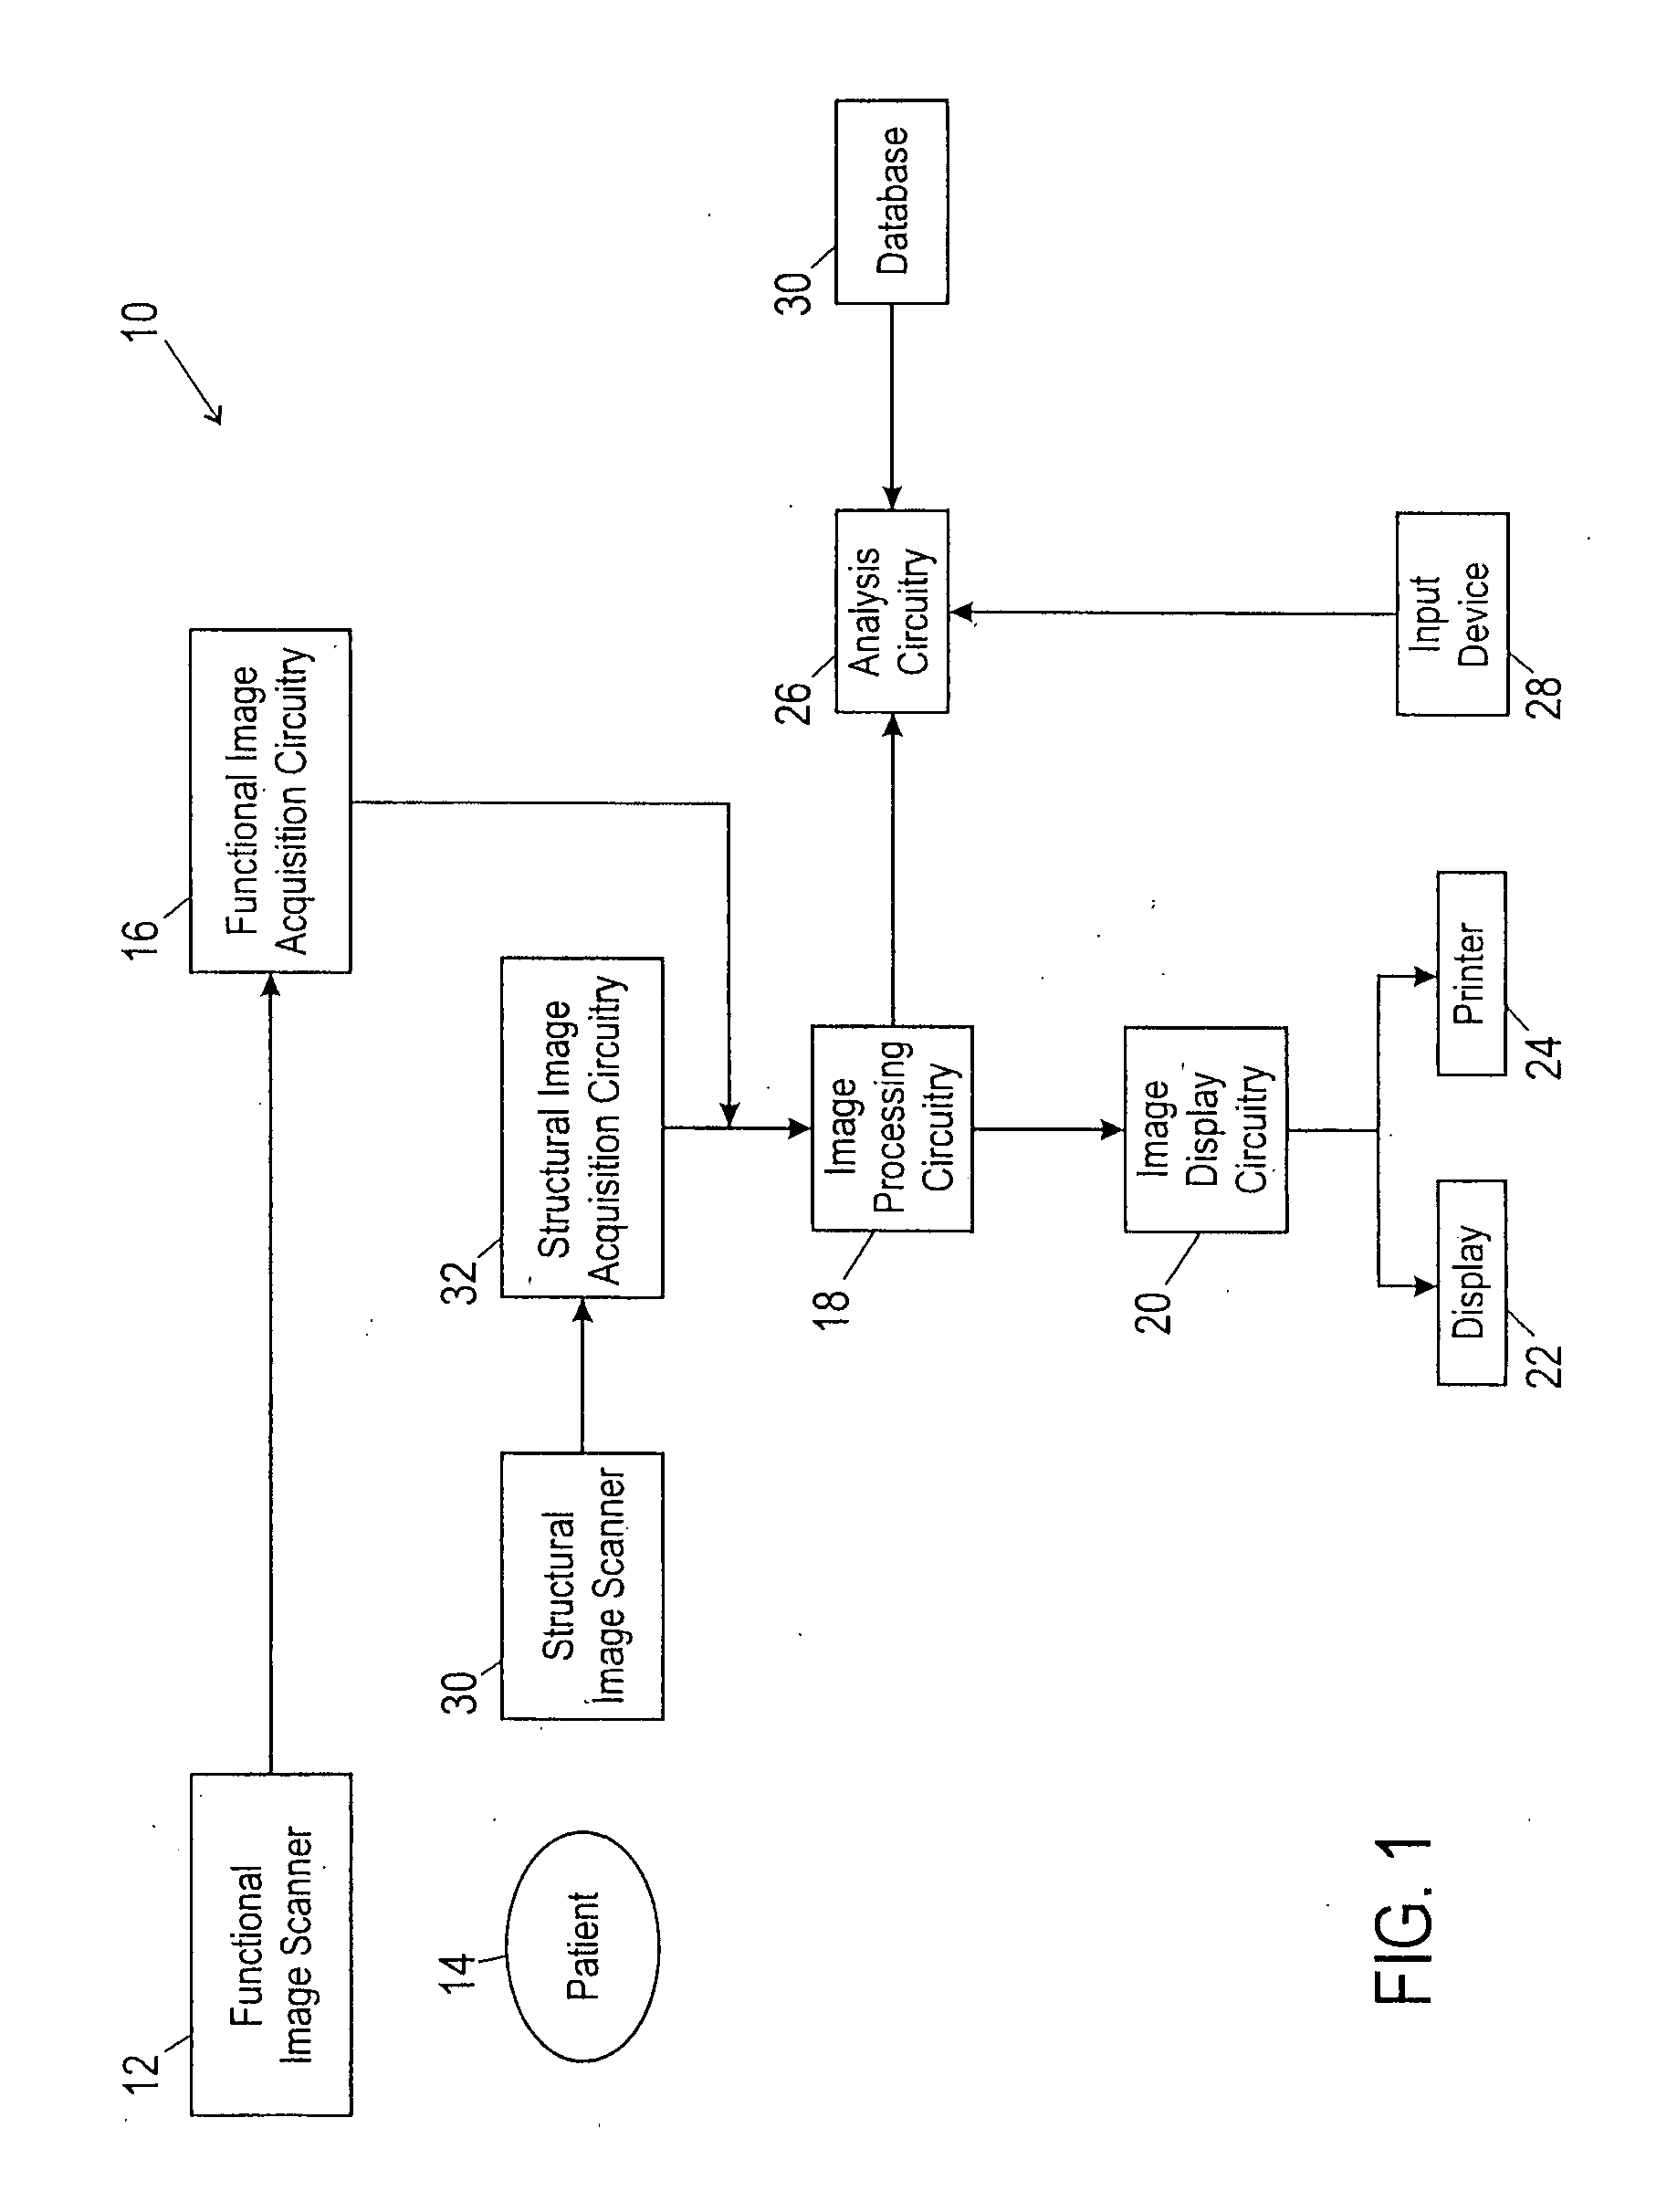 Method and apparatus for automatically characterizing a malignancy